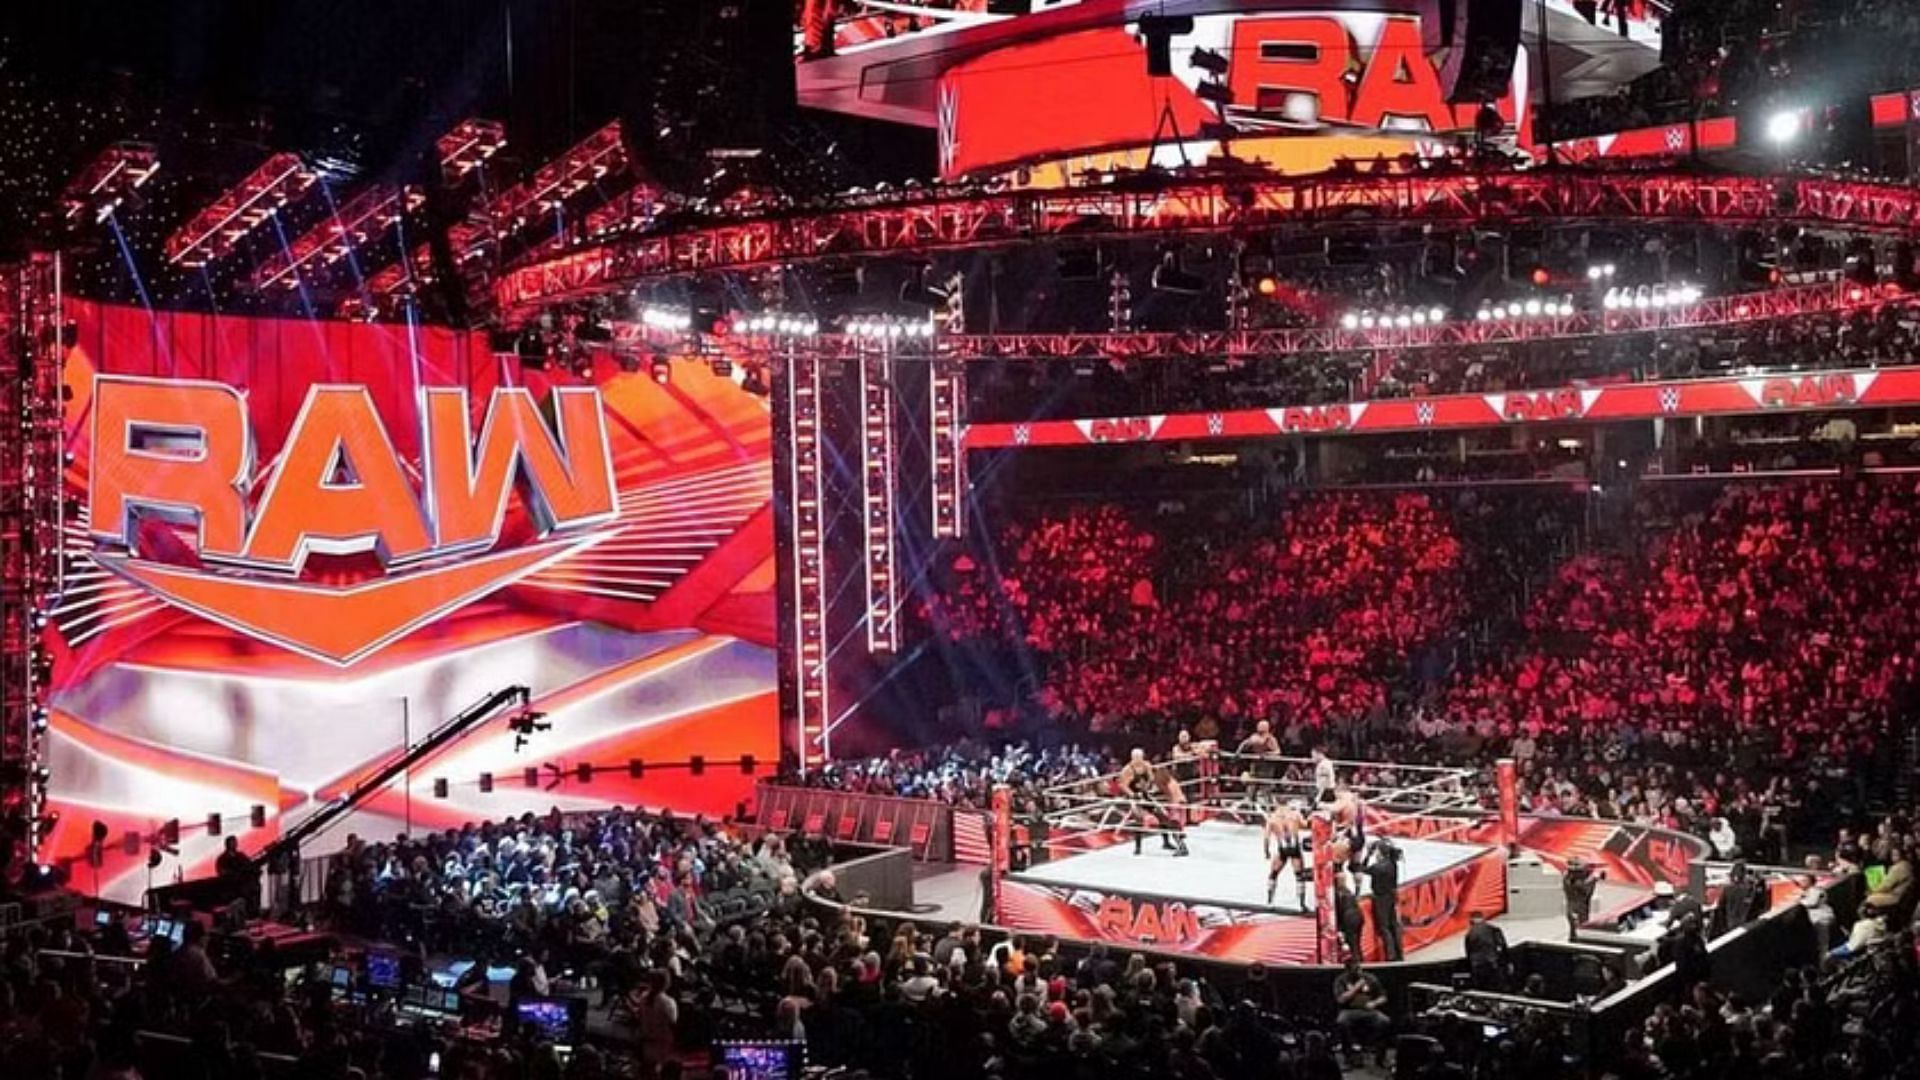 12time champion to return after 659 days at WWE RAW Day 1 and enter